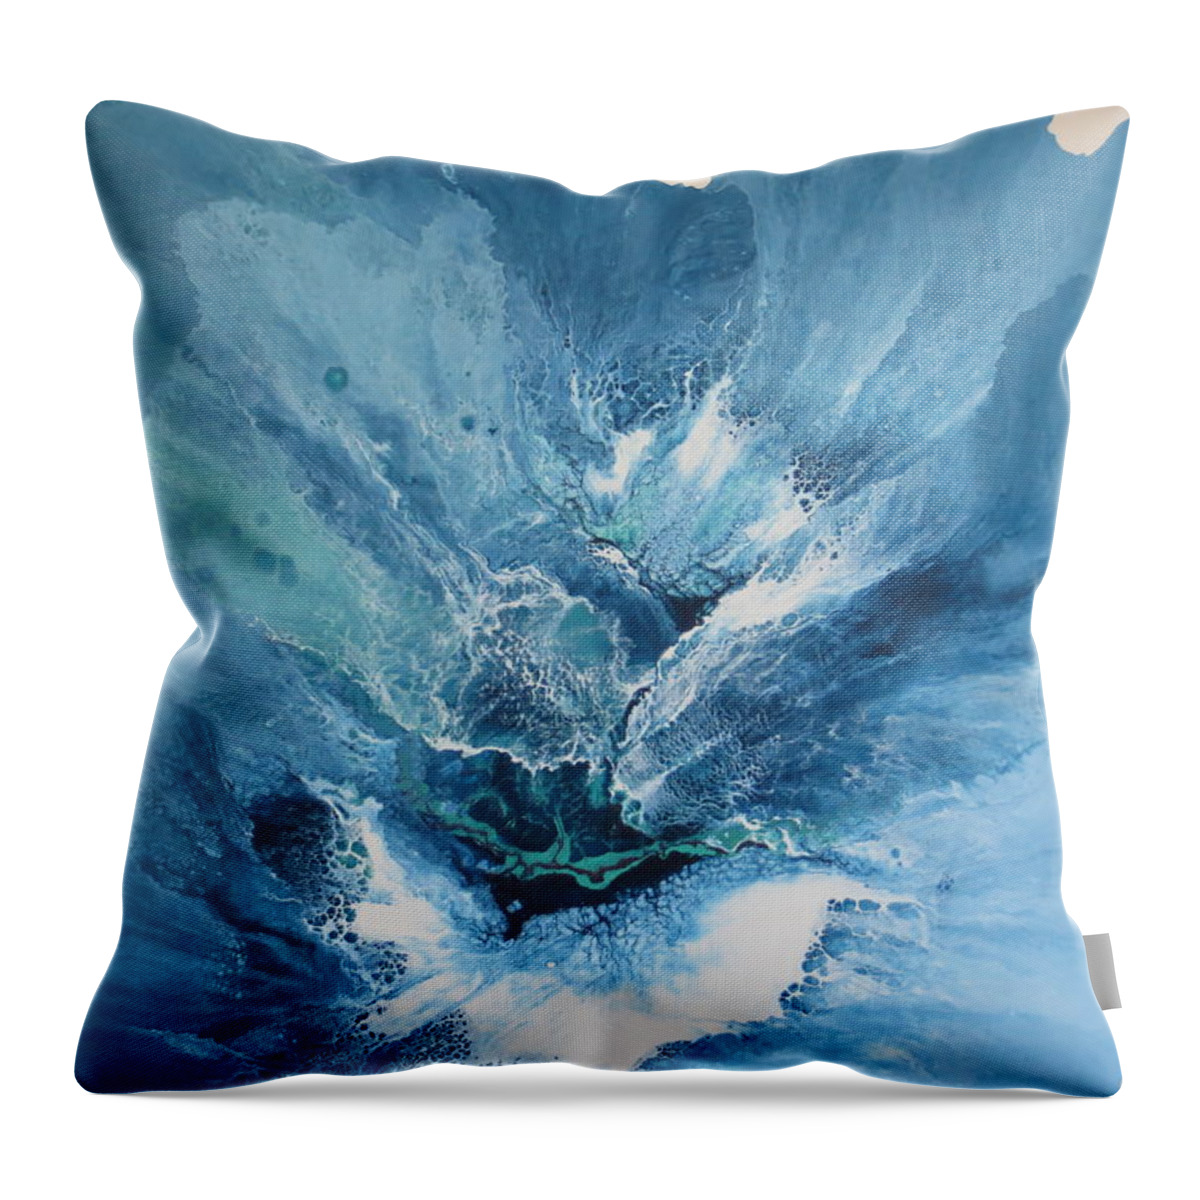 Abstract Throw Pillow featuring the painting Effusion by Soraya Silvestri